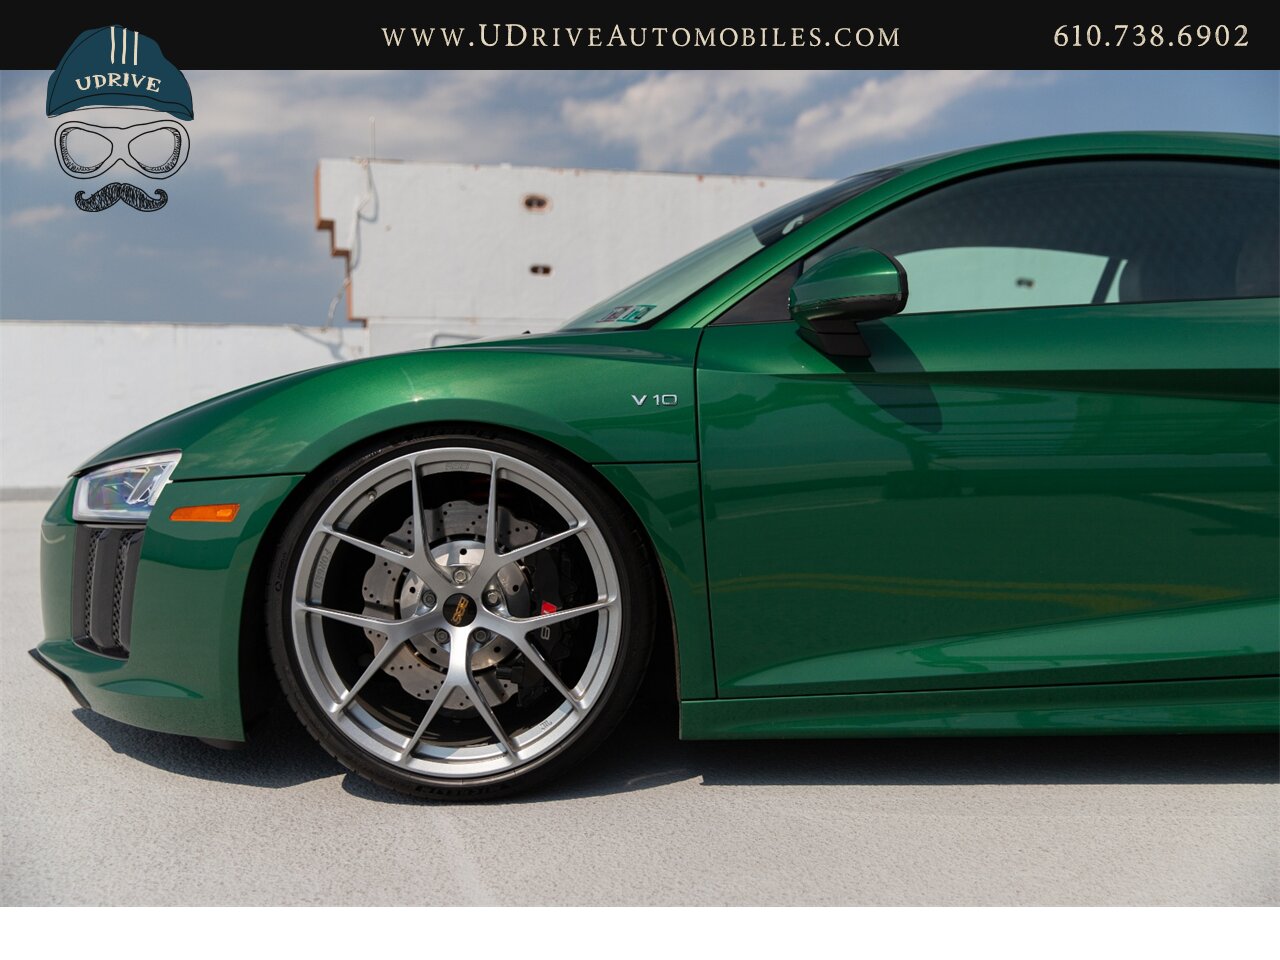 2017 Audi R8 Audi Exclusive Avocado Green Vermont Brown Leather  Diamond Stitching V10 Carbon Fiber - Photo 10 - West Chester, PA 19382